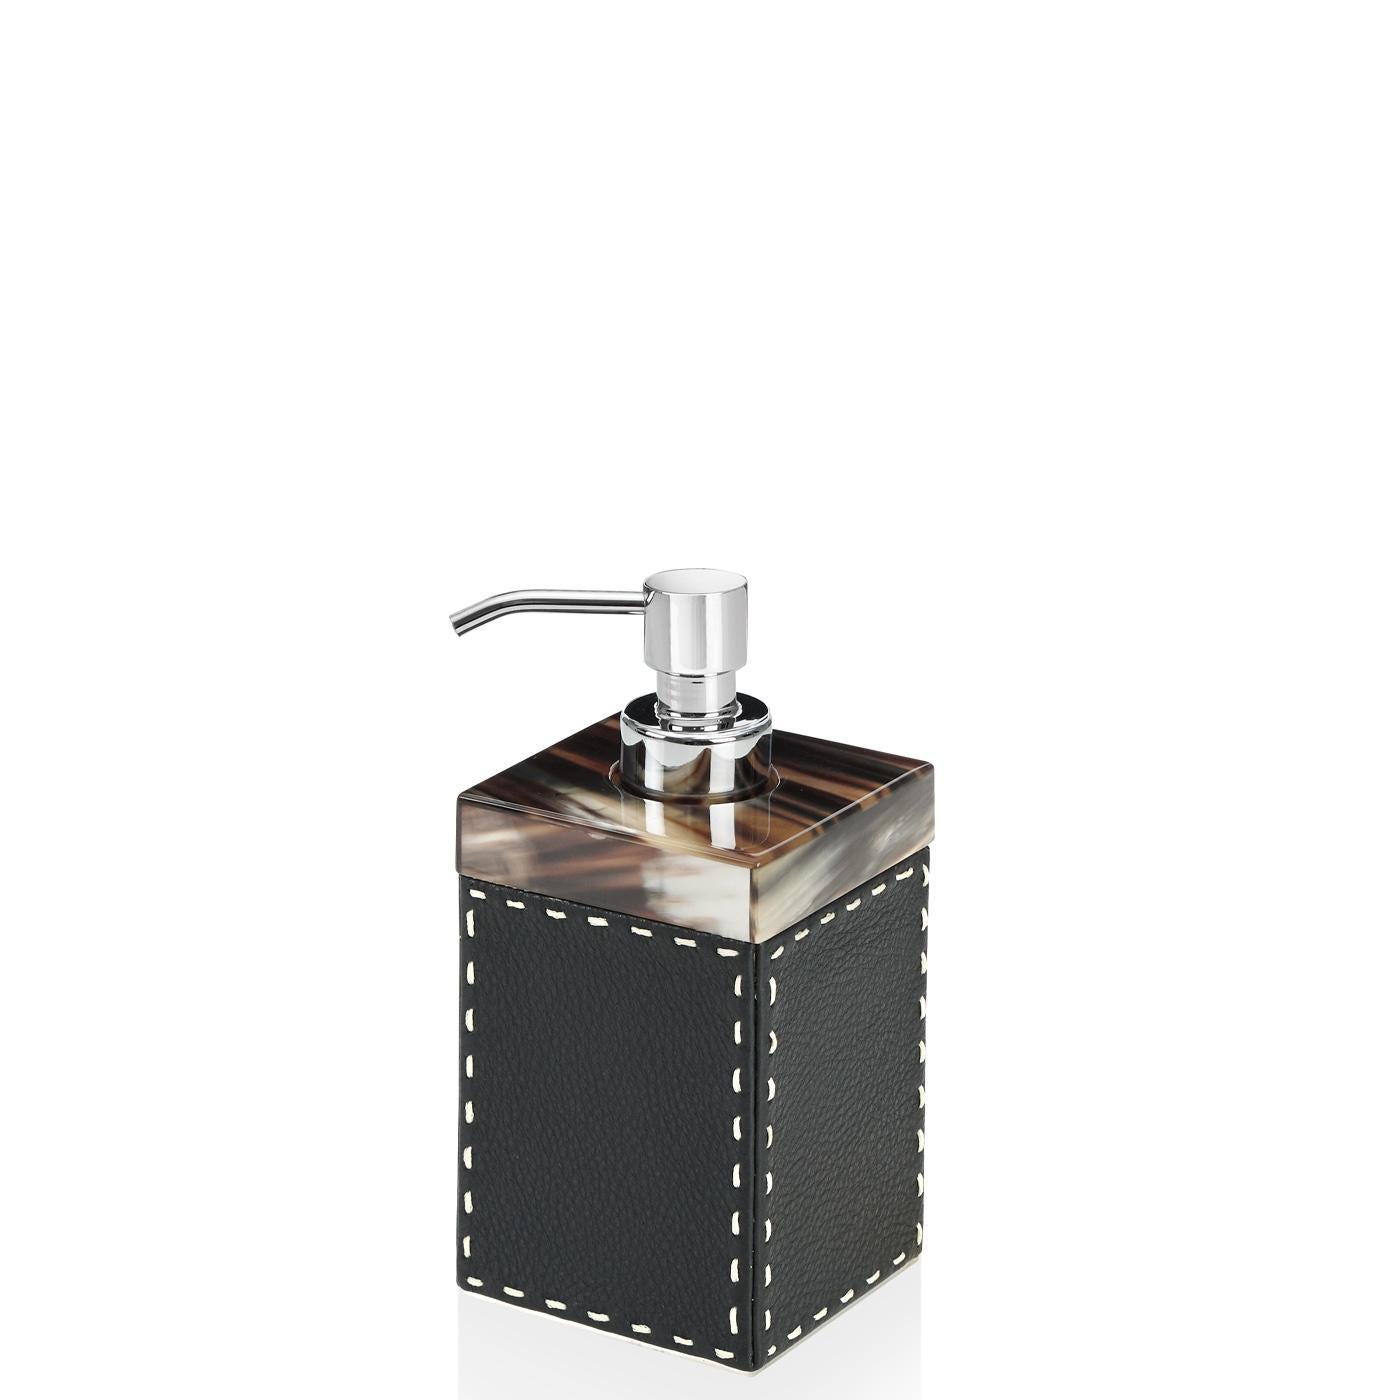 The Berenice set is a refined accessory to complete the decor of any bathroom. Berenice comprises a soap dispenser, a toothbrush holder and a tray covered in pebbled Aida leather, Onyx color, with handmade ivory stitching. The soap dispenser and the